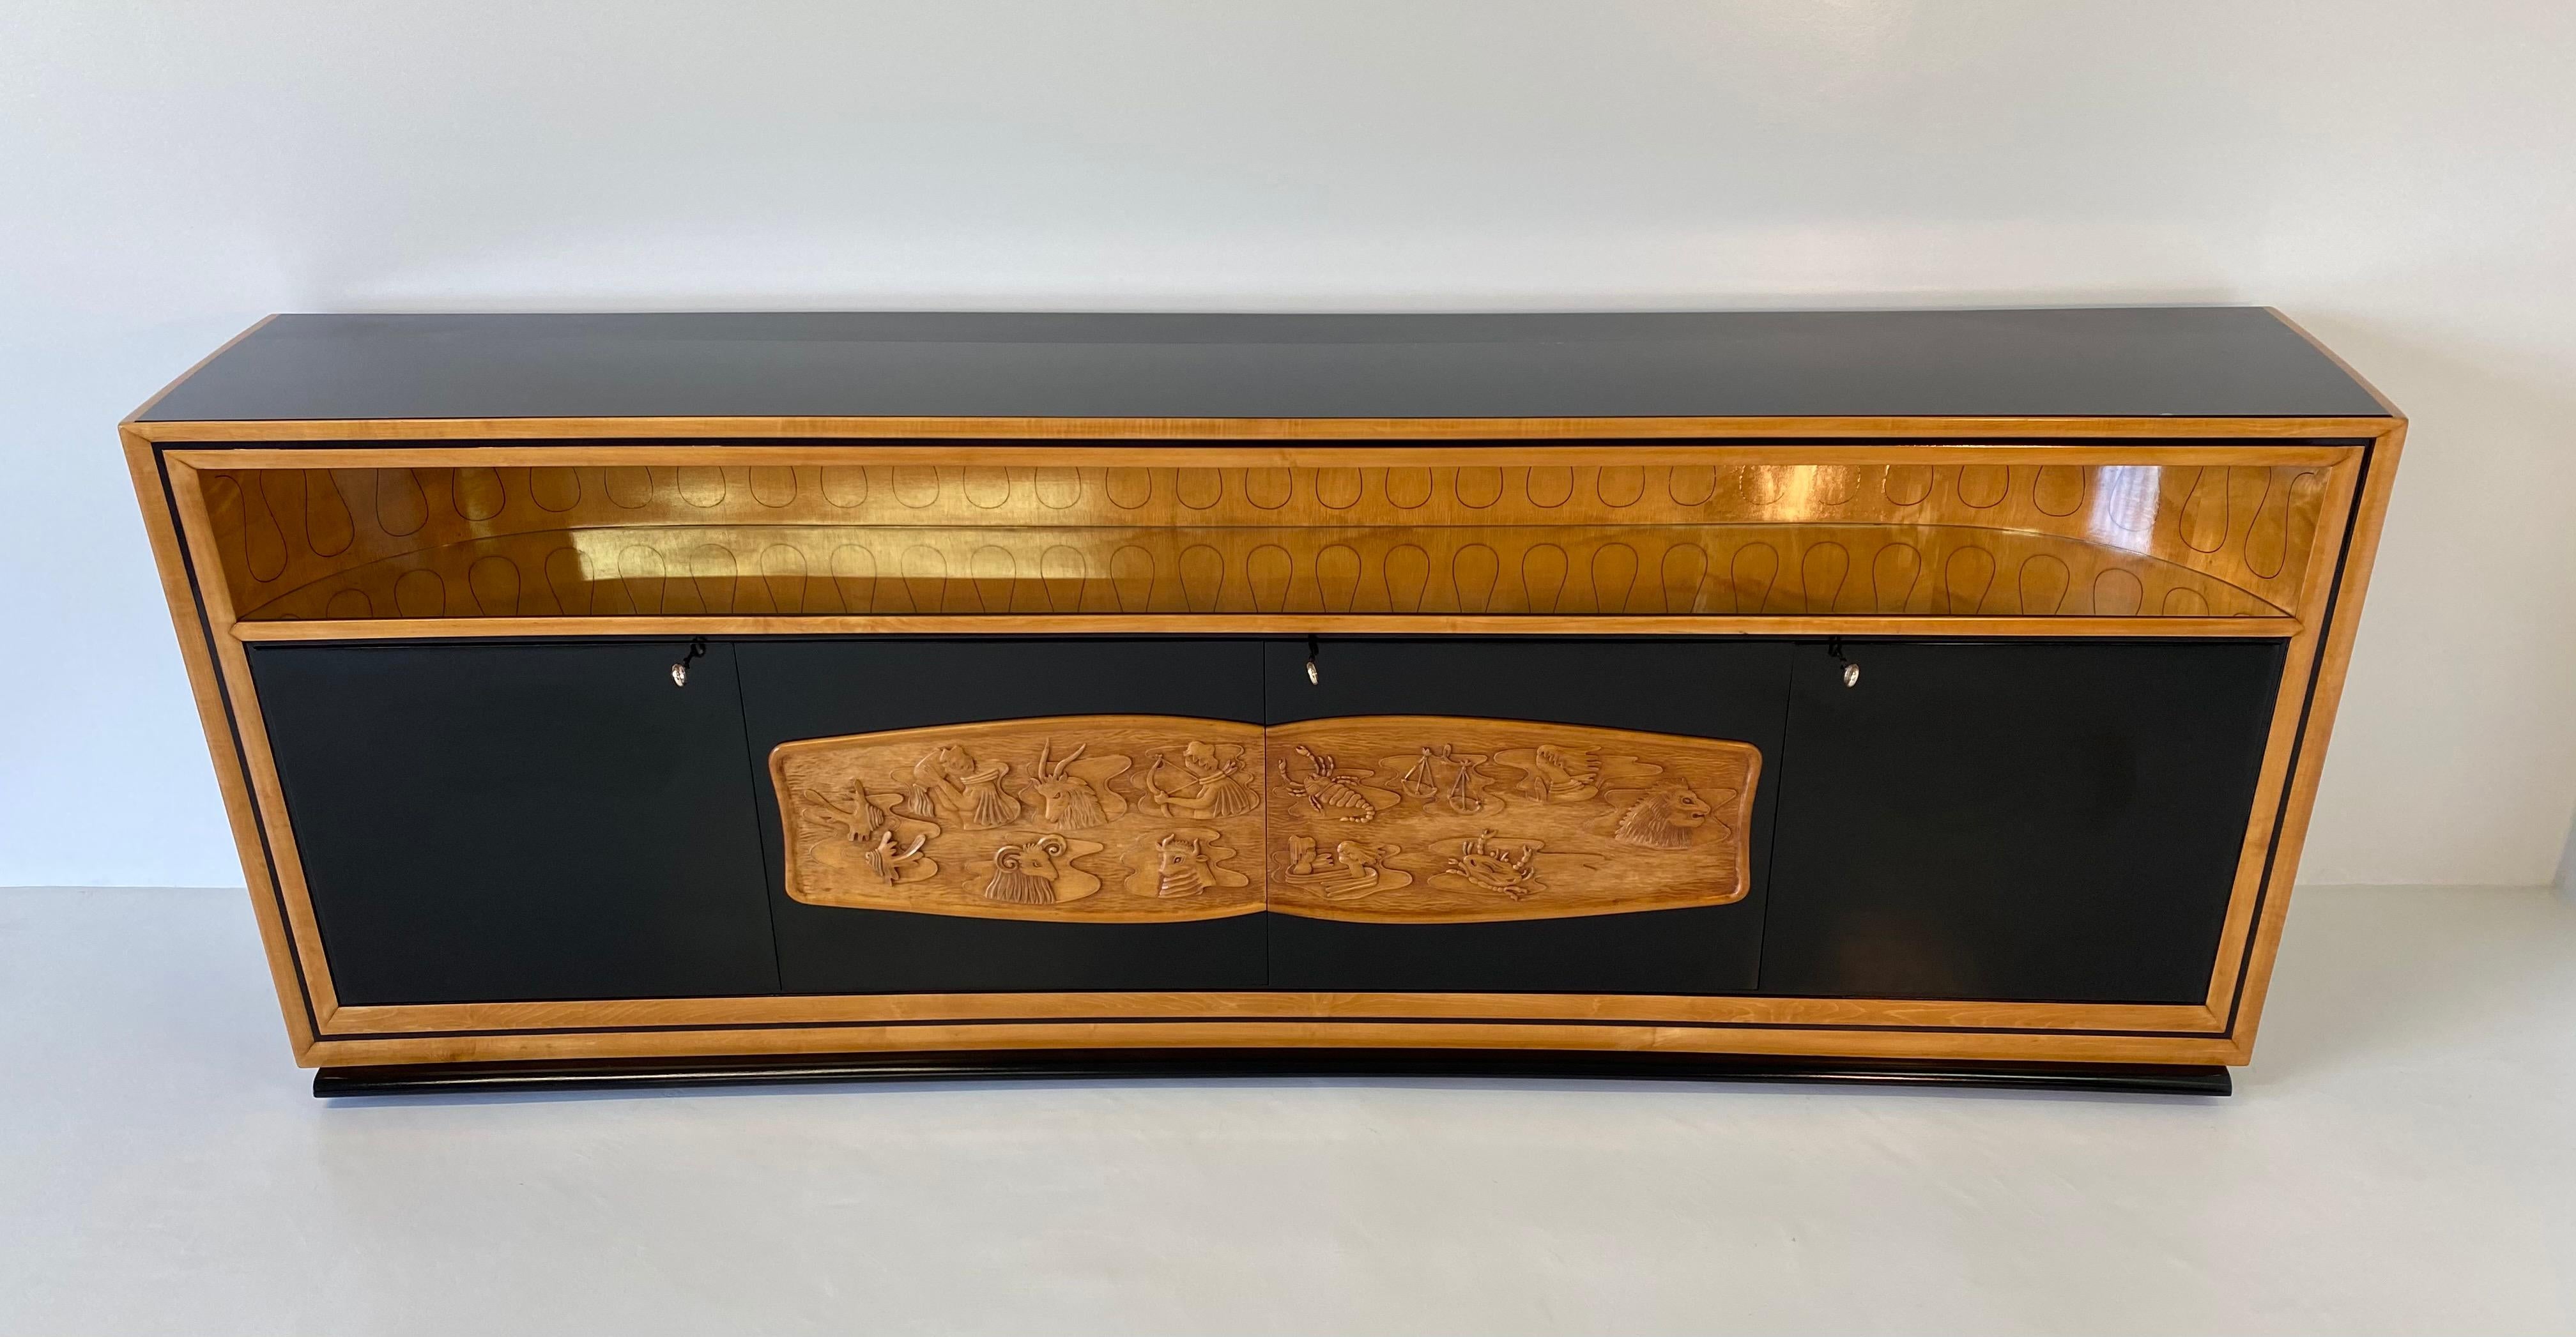 This item was produced in the 1940s in Cantù ( Italy ) by Vittorio Dassi for the ' Permanente Mobili Cantù'.
This precious sideboard is entirely black lacquered, the profiles and the large central decoration are in carved maple representing the